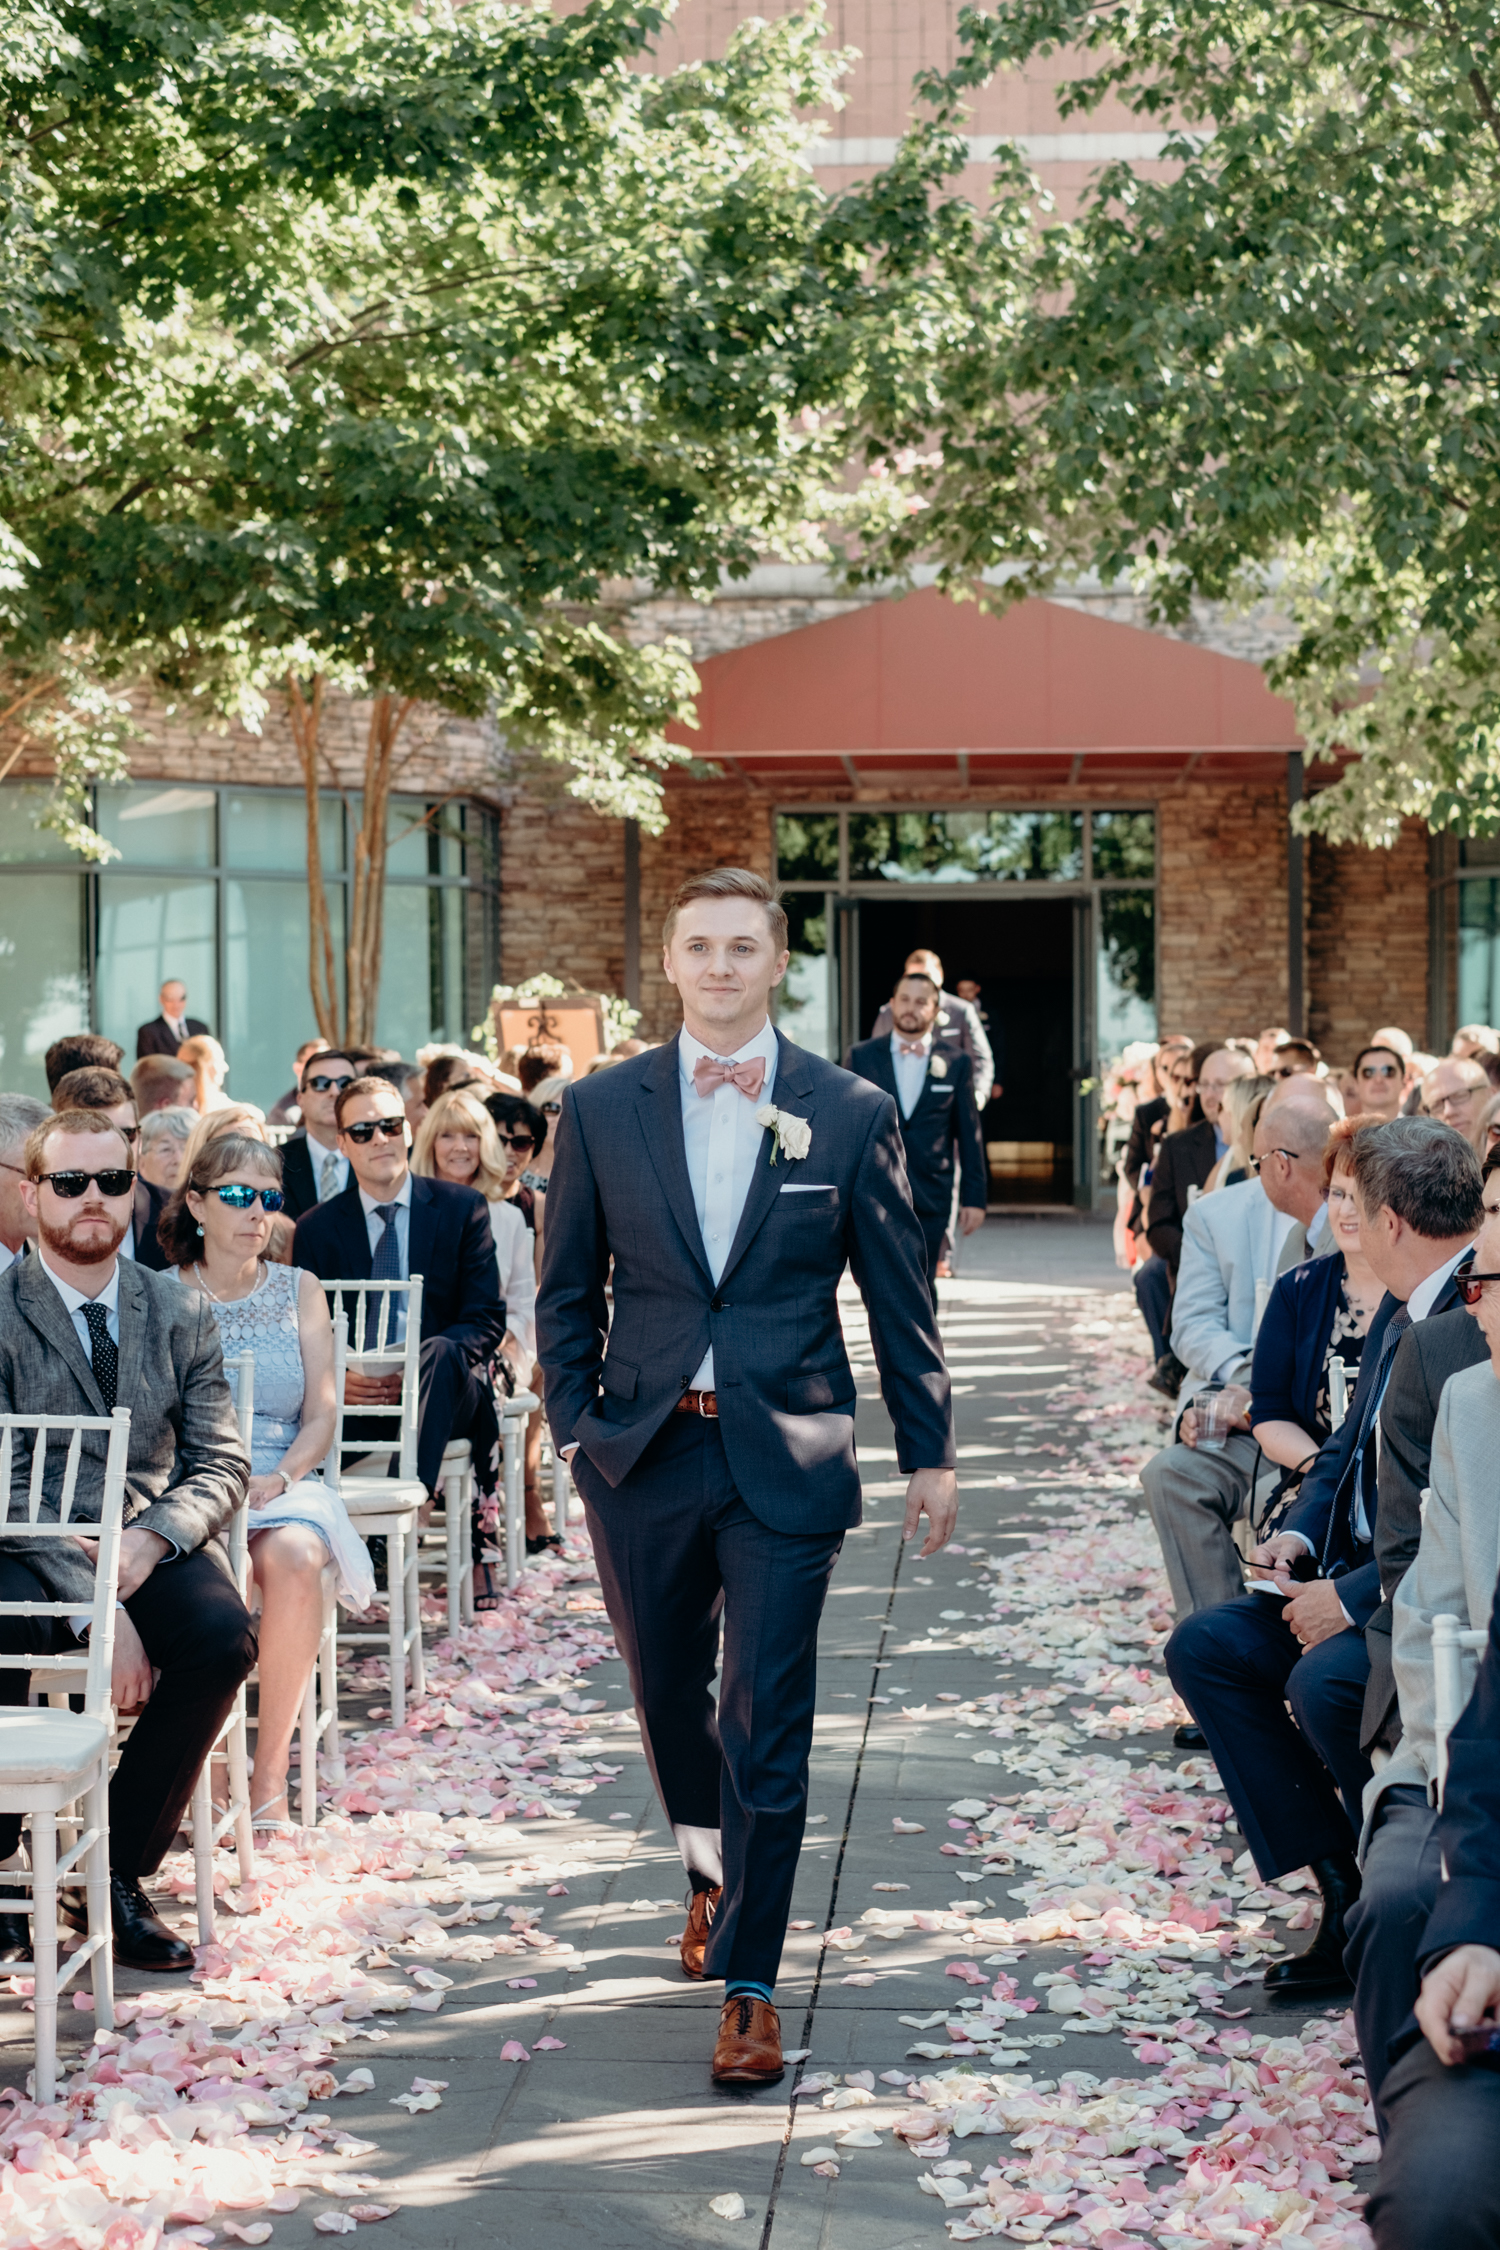 A groom walks up an aisle strewn with petals for this wedding ceremony at Lansdowne Resort.